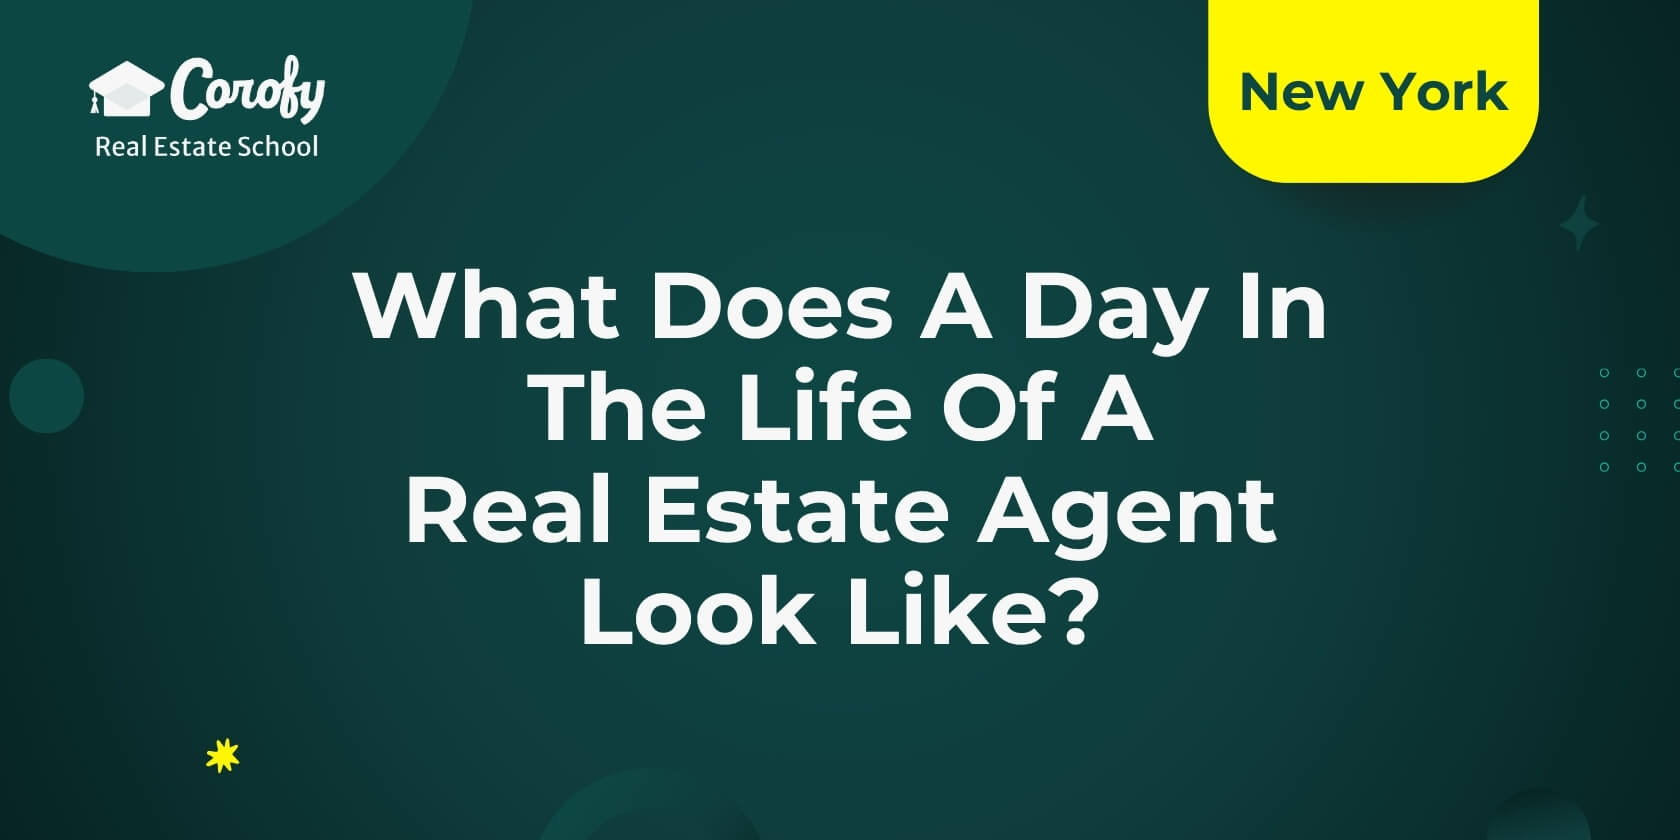 What Does a Day in the Life of a Real Estate Agent Look Like?